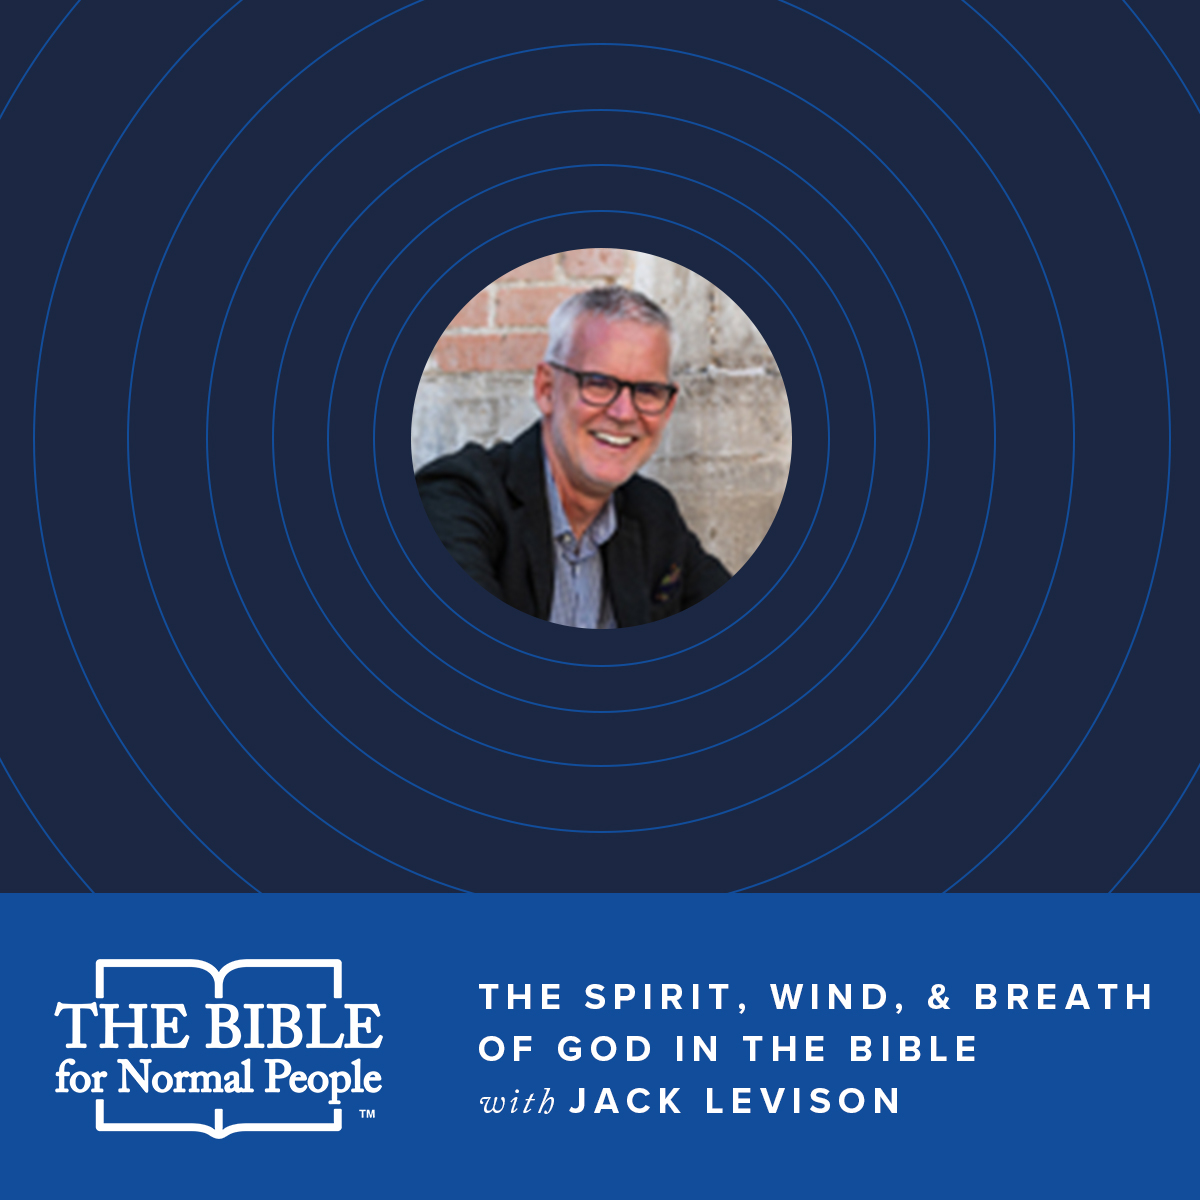 Jack Levison- The Spirit, Wind, & Breath of God in the Bible